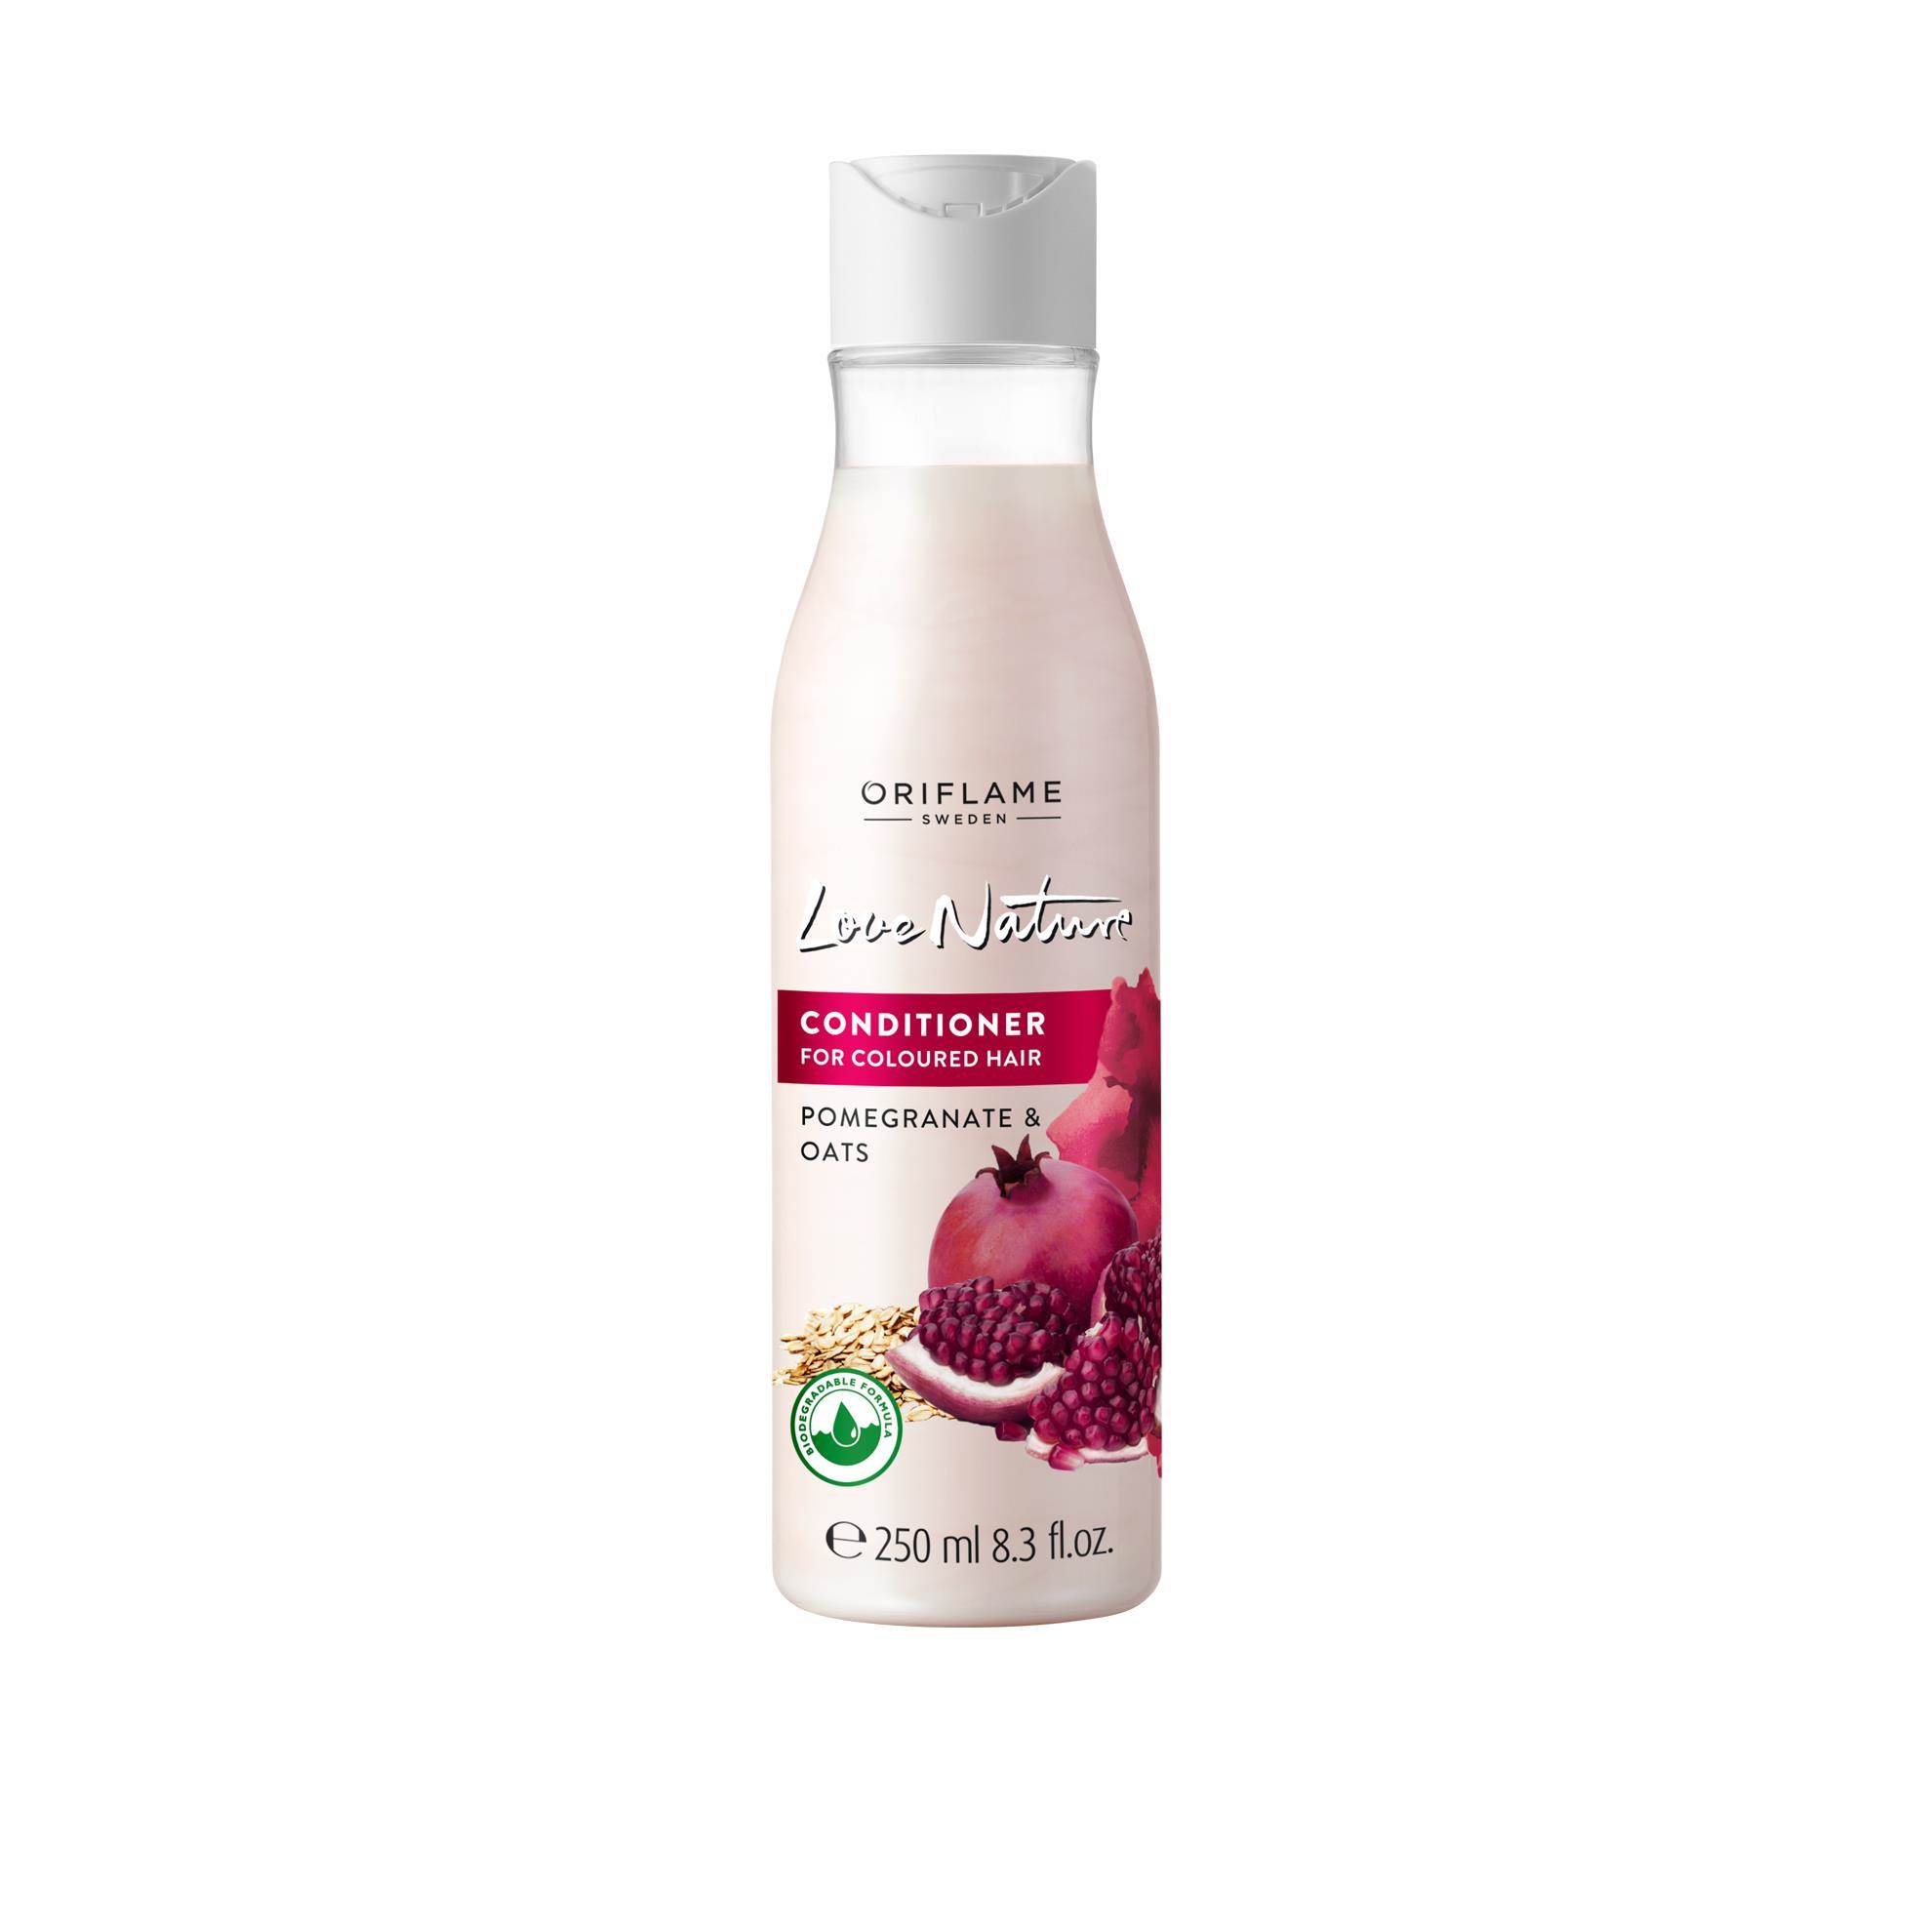 love-nature-conditioner-for-coloured-hair-pomegranate-oats